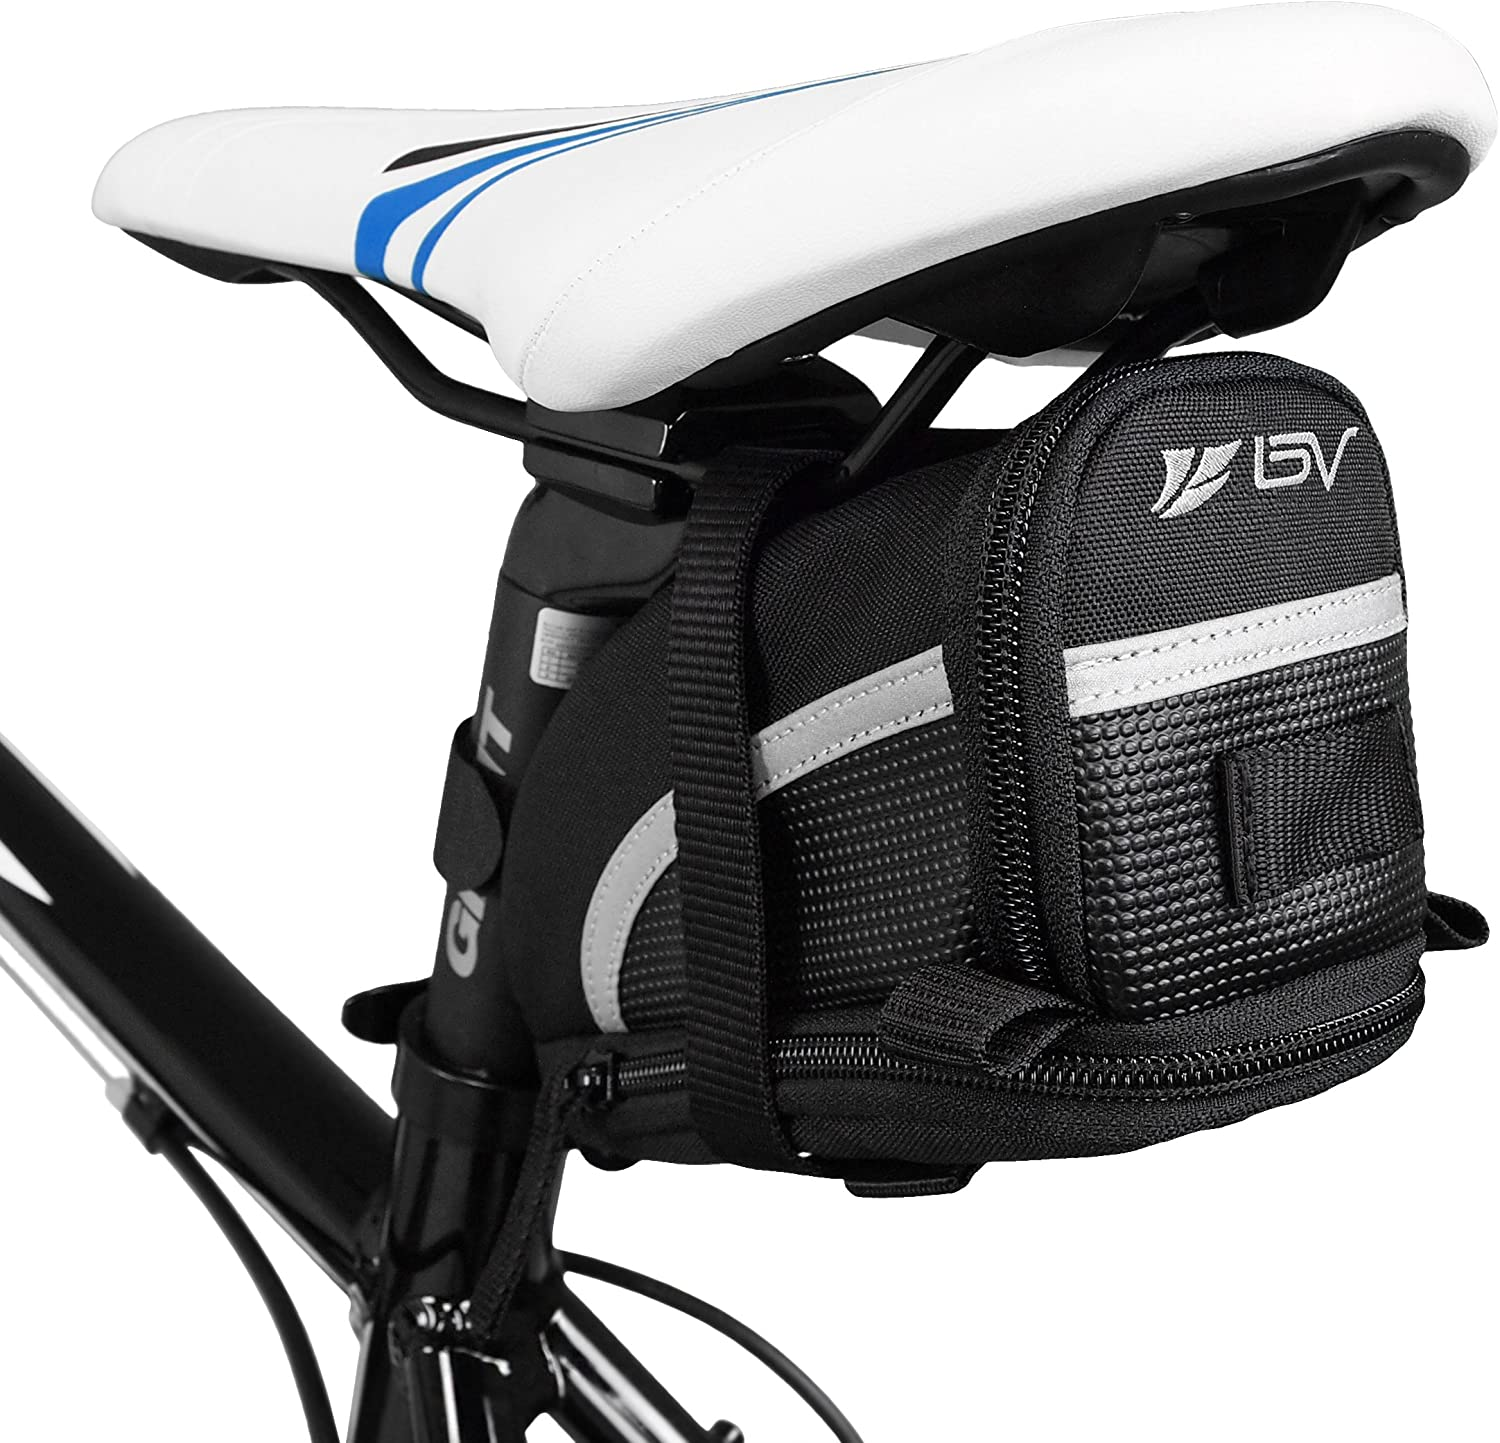 If you are looking for a great mountain bike tool bag idea then try this saddlebag which fits snuggly under the seat of your mountain bike.